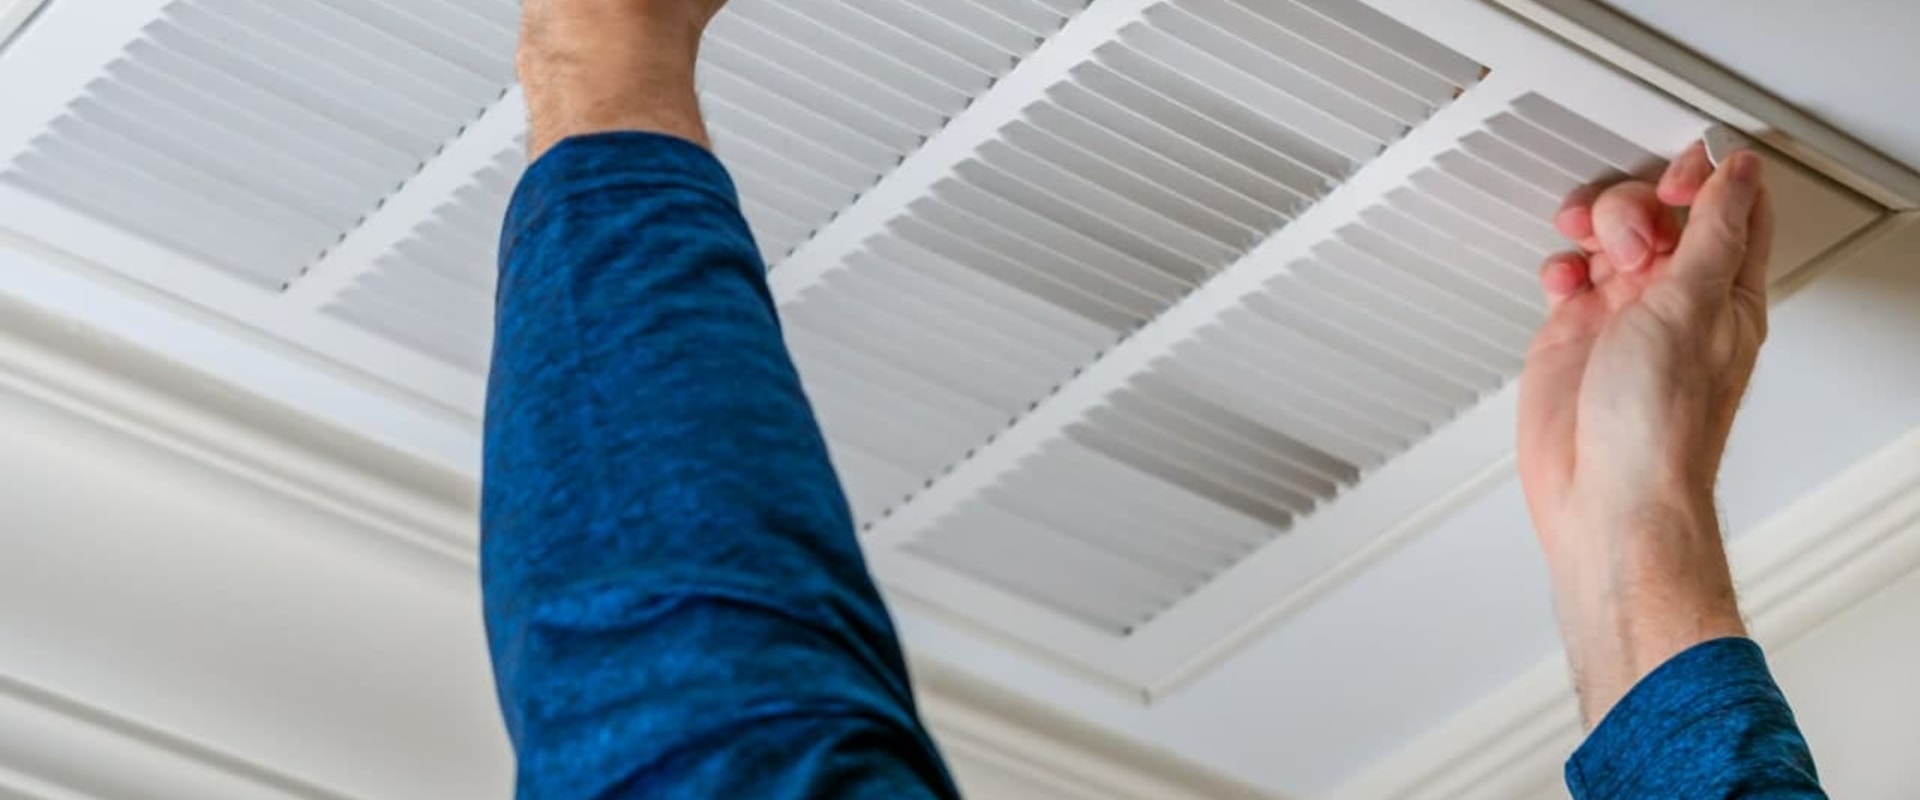 Benefits of Using 16x16x1 Furnace Air Filters